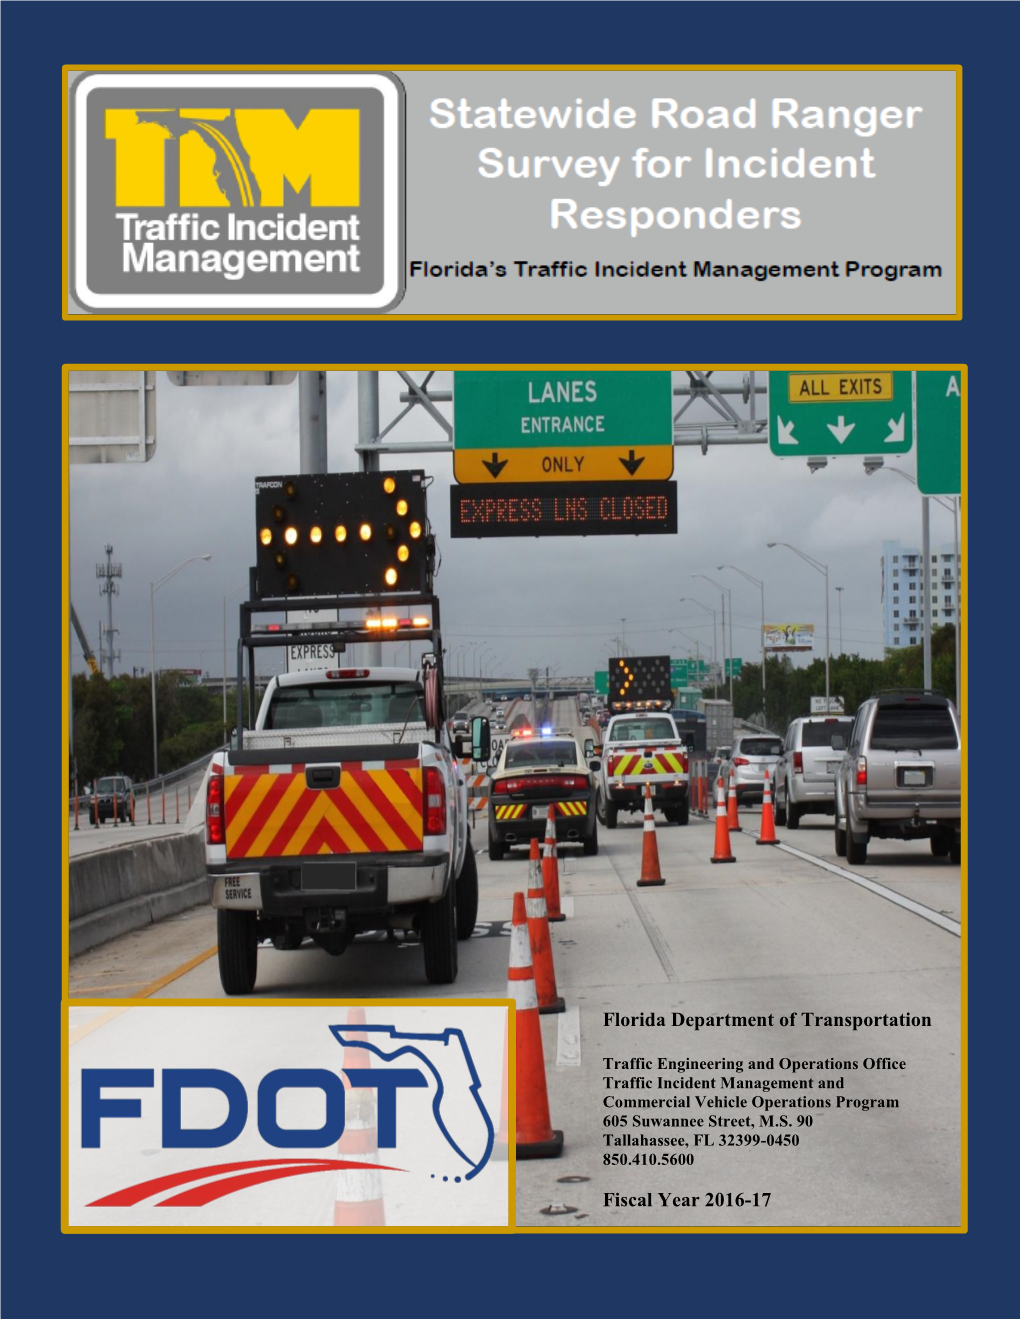 Statewide Road Ranger Survey for Incident Responders